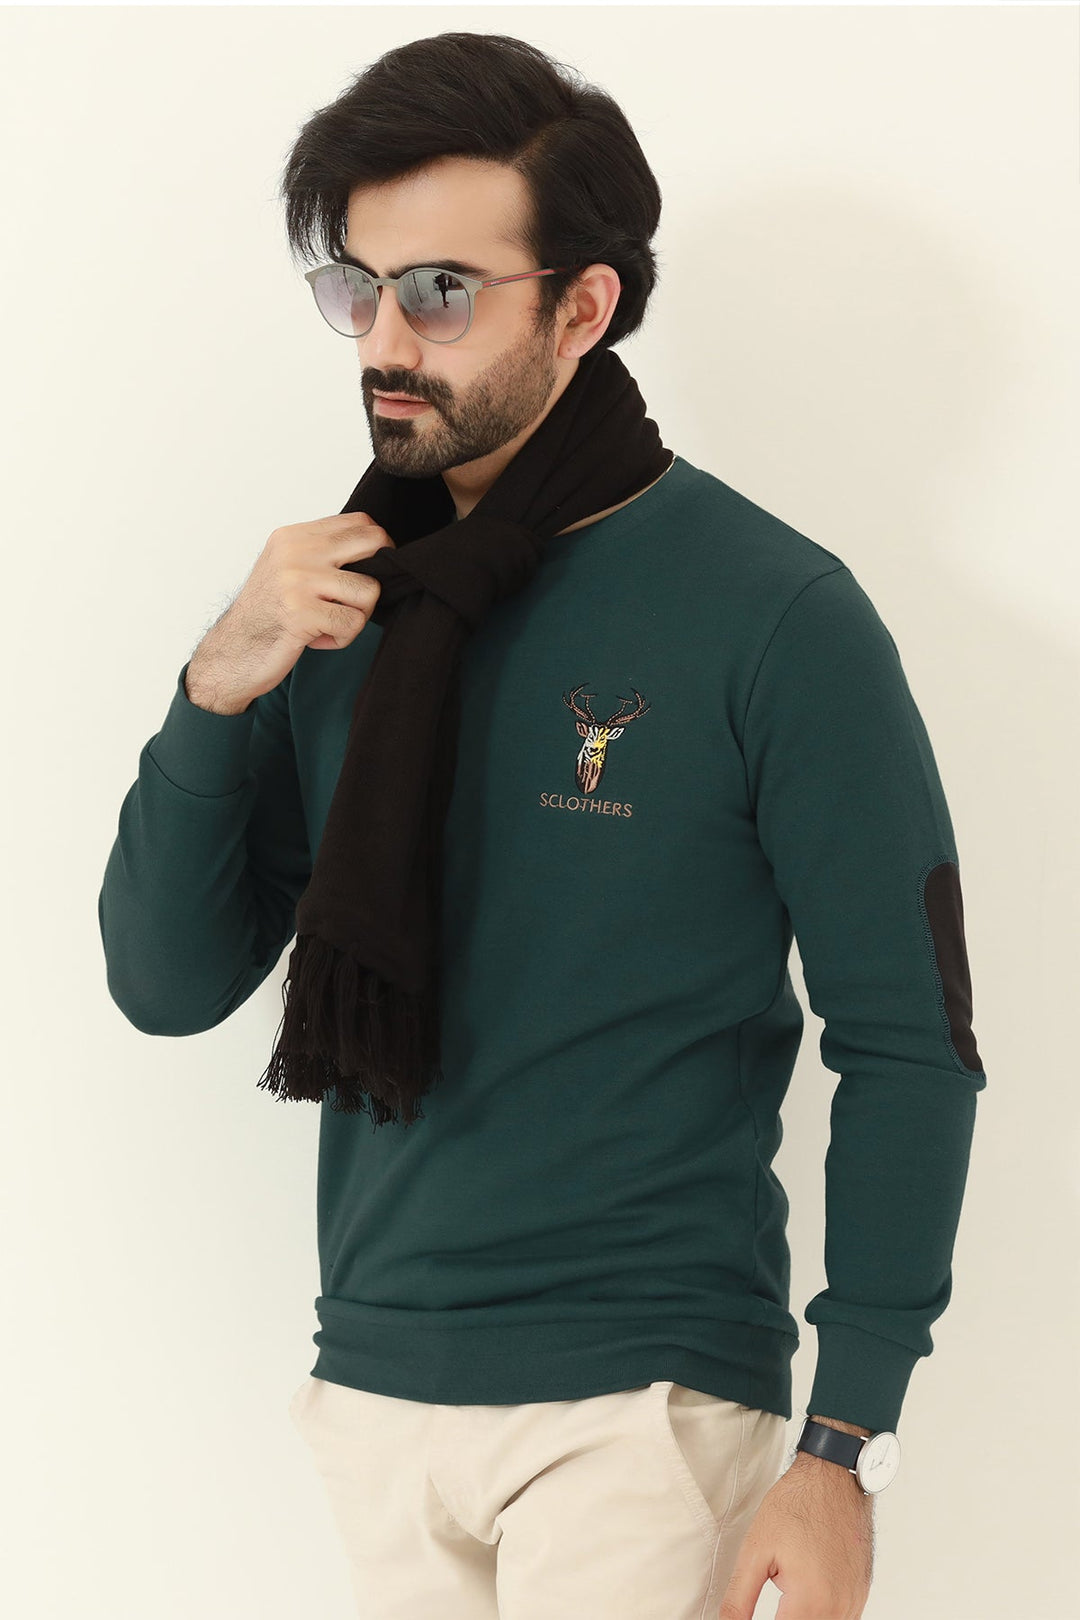 Deep Teal Resolute Embroidered Sweatshirt - W23 - MSW077R